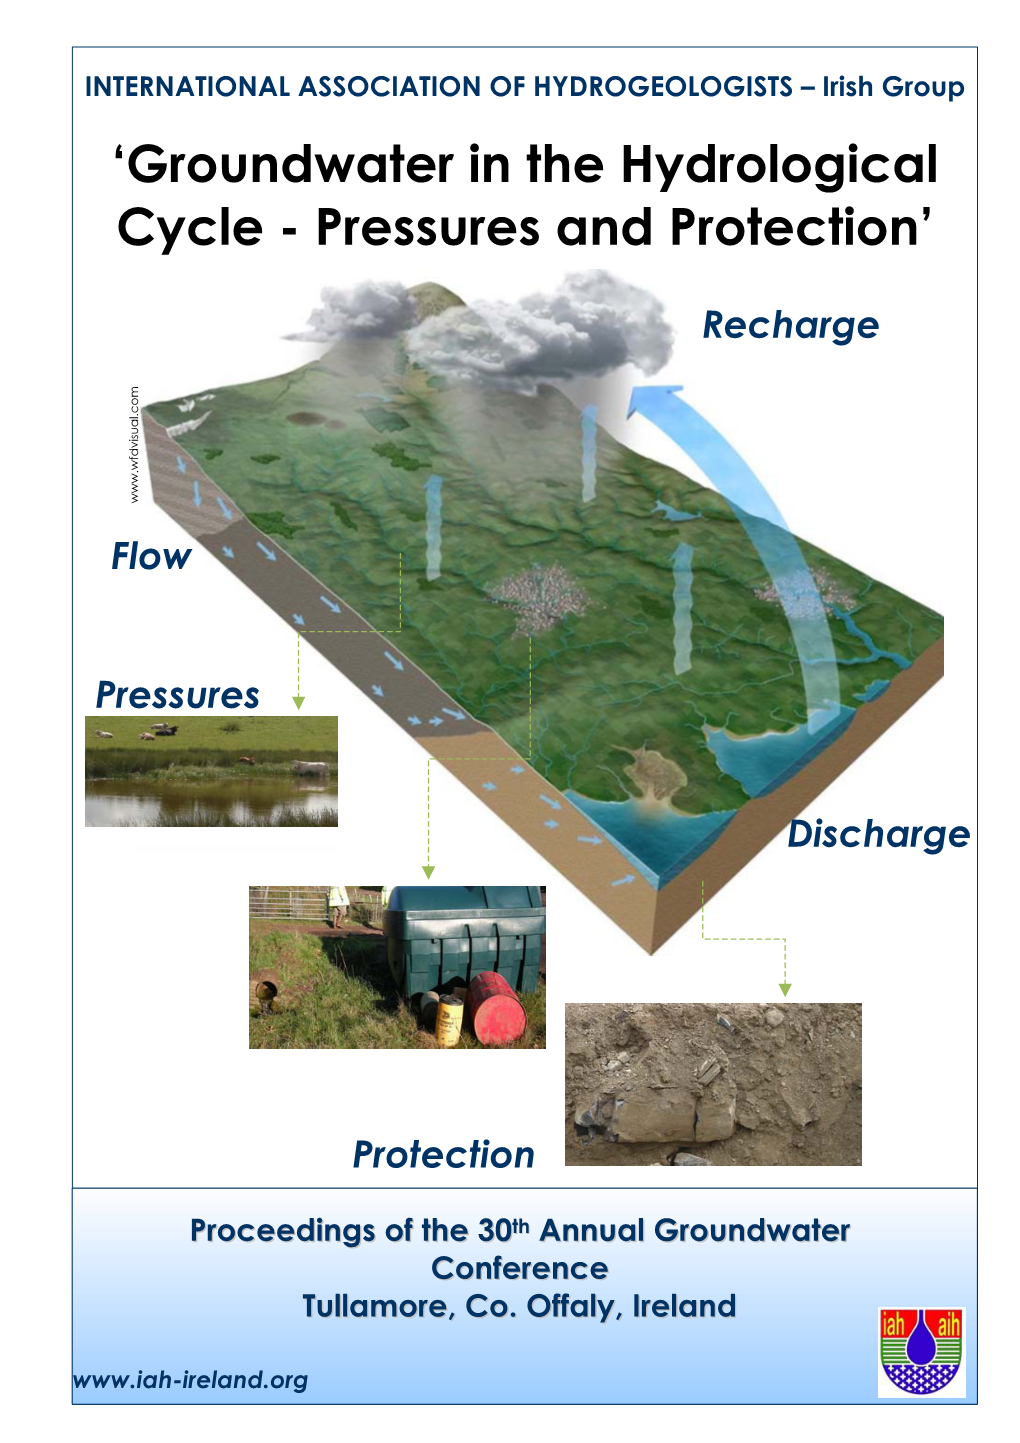 'Groundwater in the Hydrological Cycle